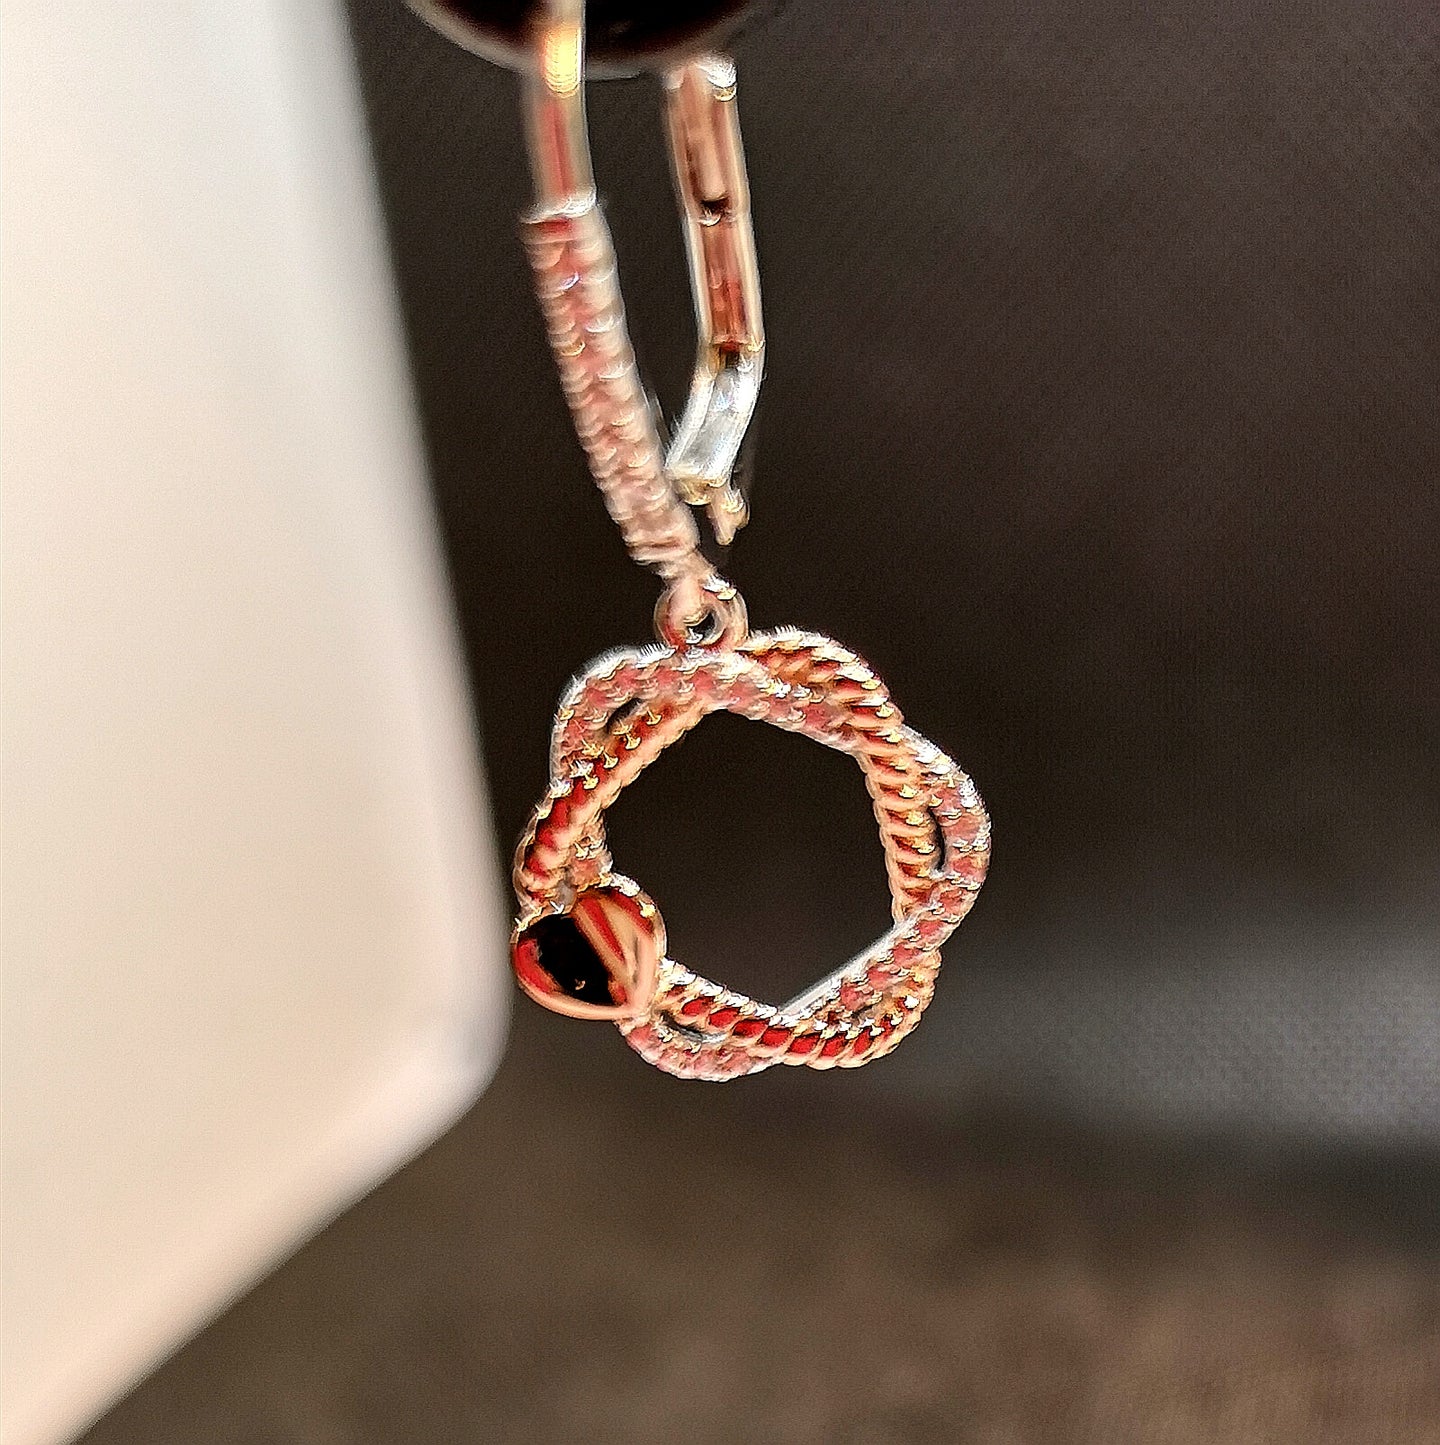 Sterling silver with rose gold and rhodium finish, micro set cubic